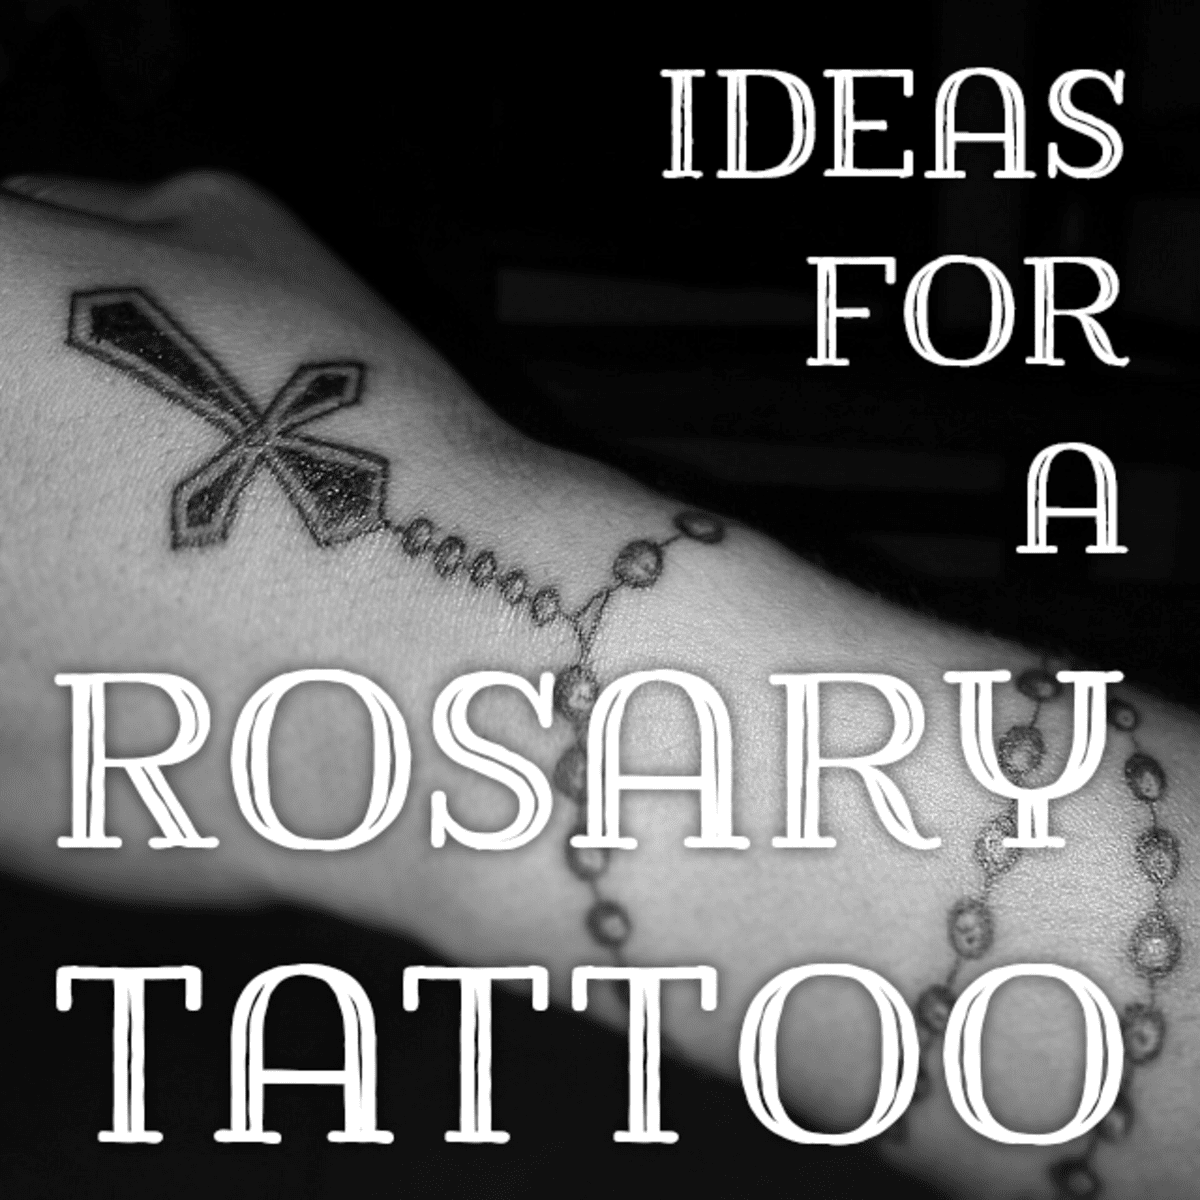 rosary tattoo on hand for womenTikTok Search